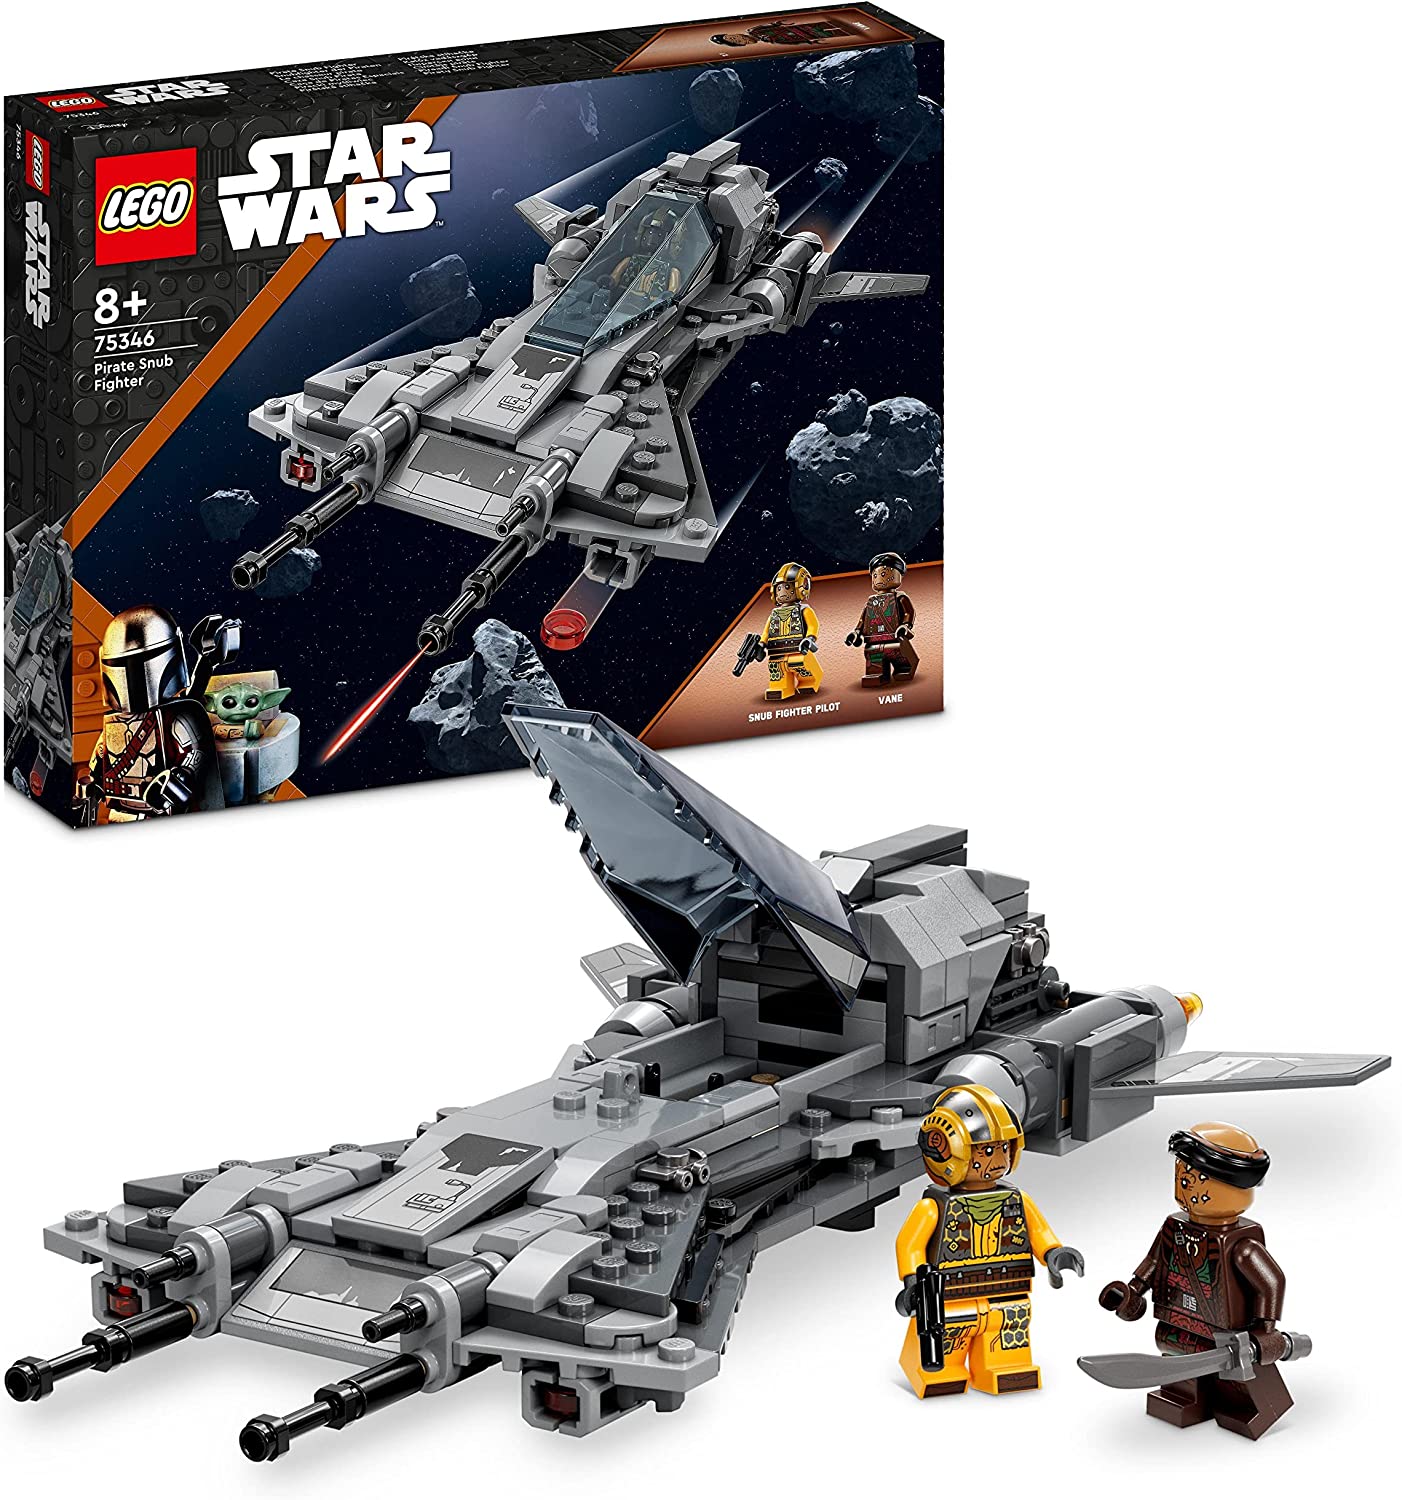 LEGO 75346 Star Wars Snubfighter of the Pirate Set, The Mandalorian Season 3 Toy for Building with Starfighter Model, Pilot and Vane Mini Figures, Collectible Gift for Children